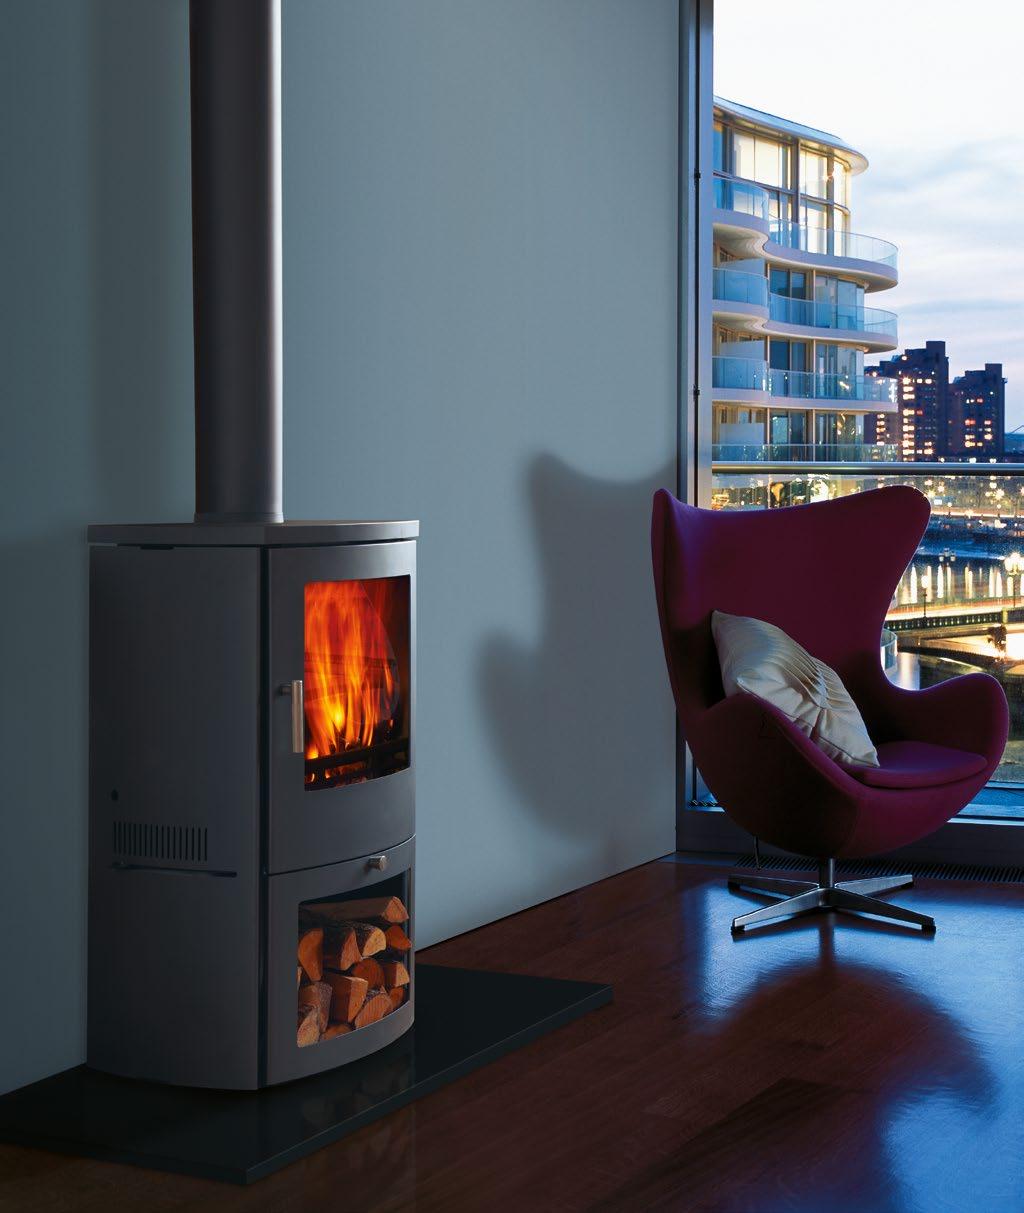 16 Chesney s Solid Fuel Stove Collection The Milan 6 kilowatt stove is shown in silver